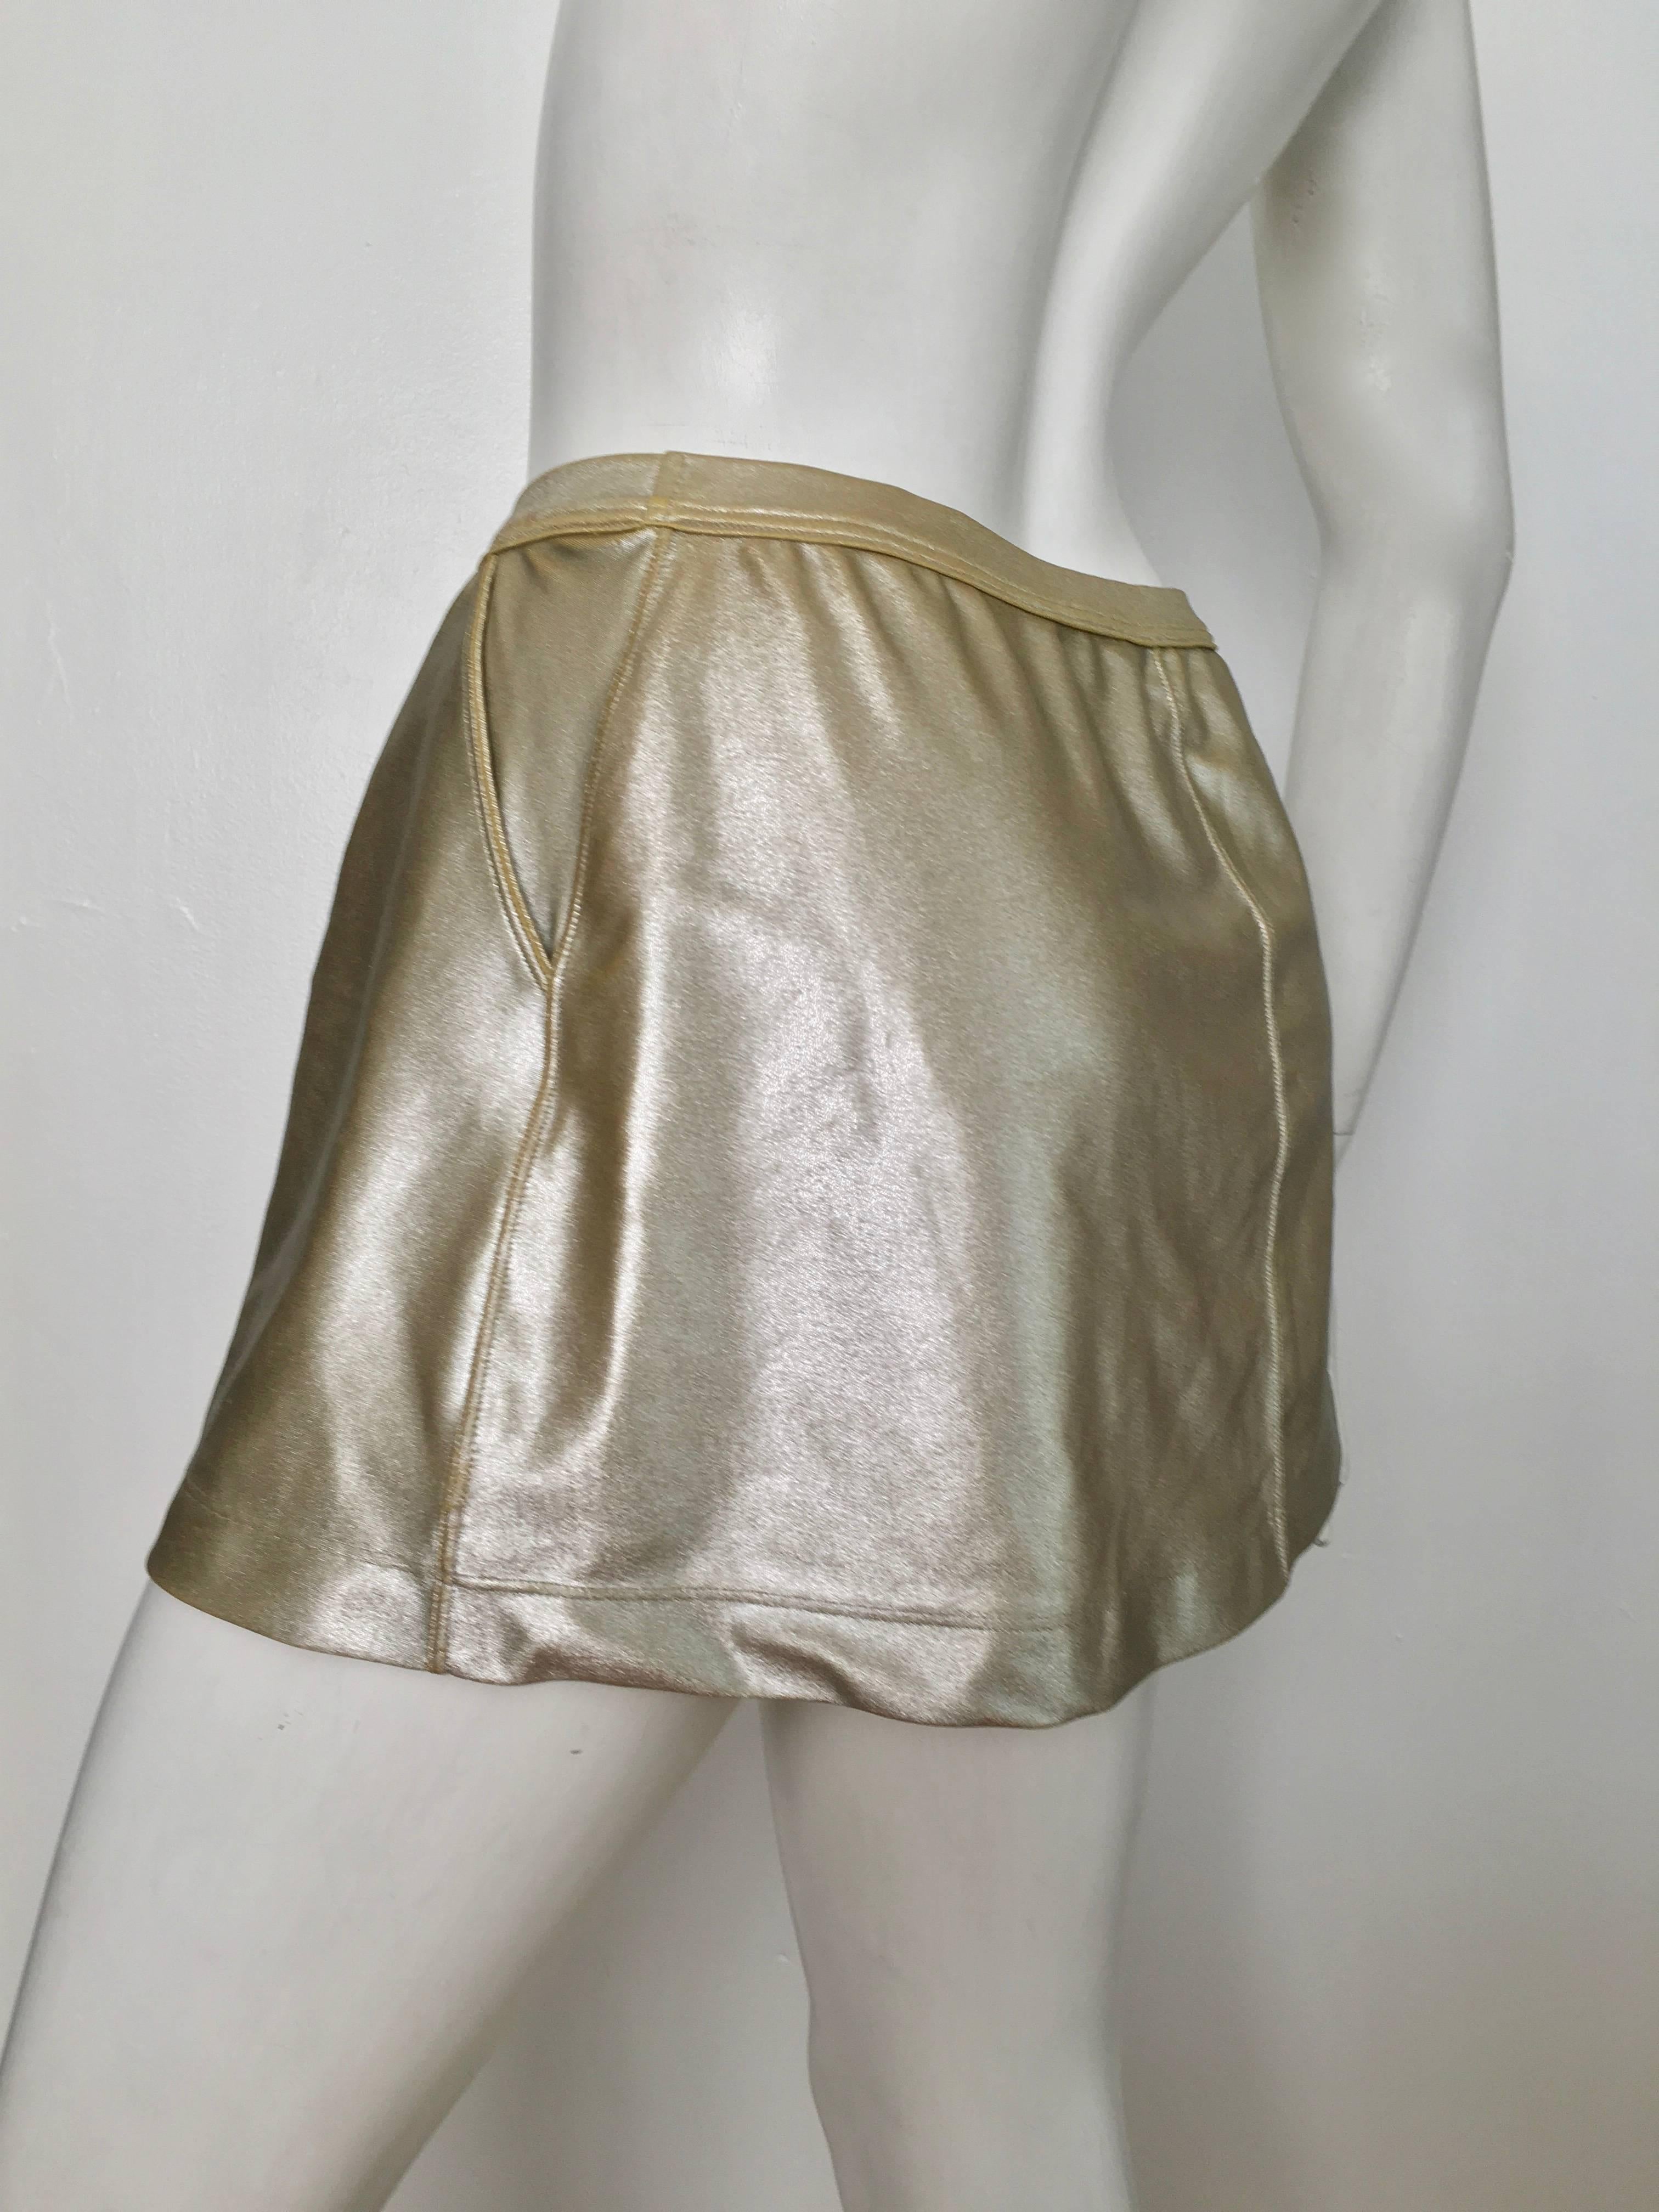 Women's or Men's Tomas Maier Gold Lycra Miniskirt with Pockets Size 4, made in Italy  For Sale